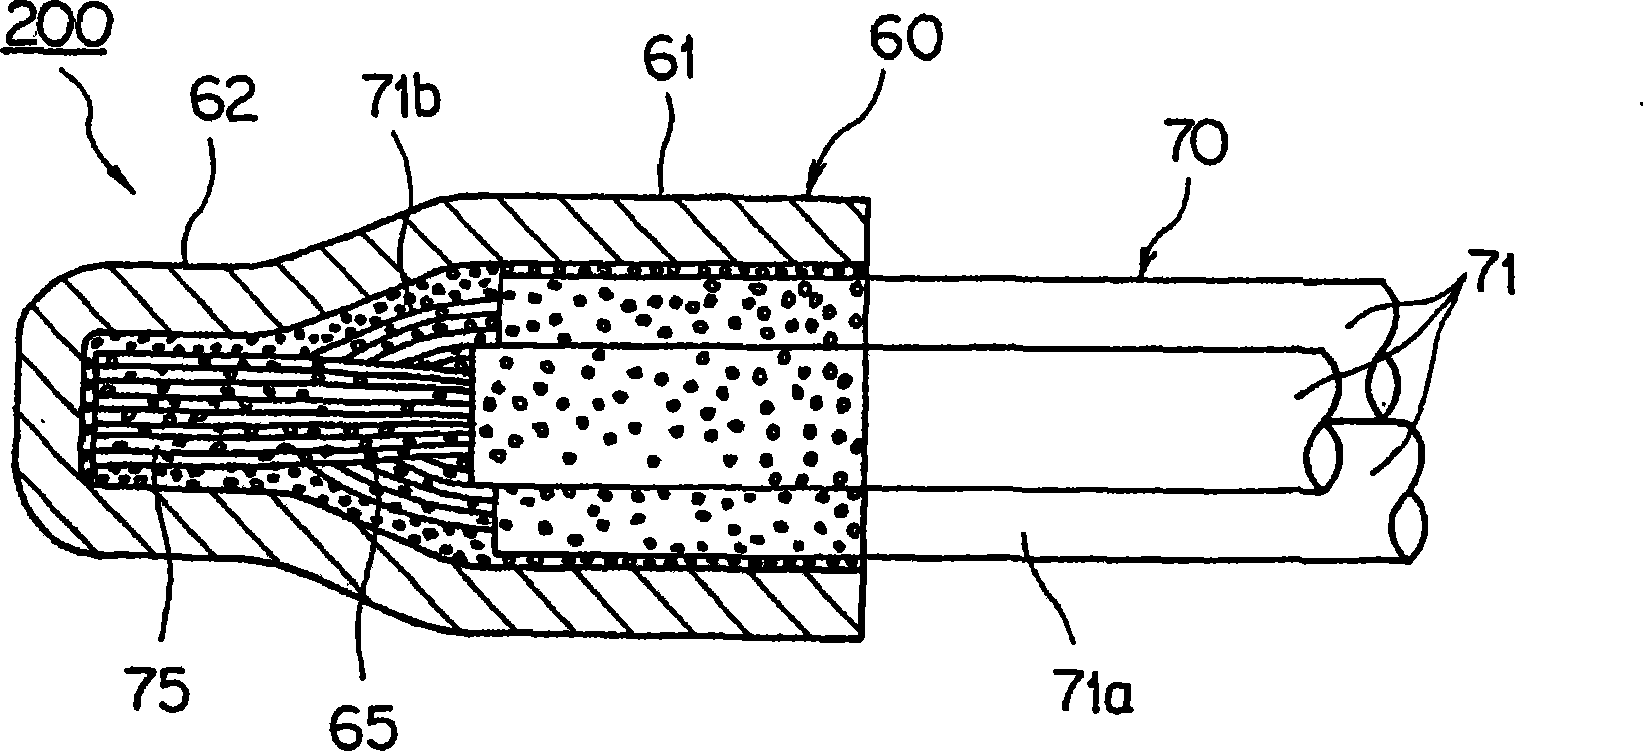 Method for waterproofing connection part of covered wire